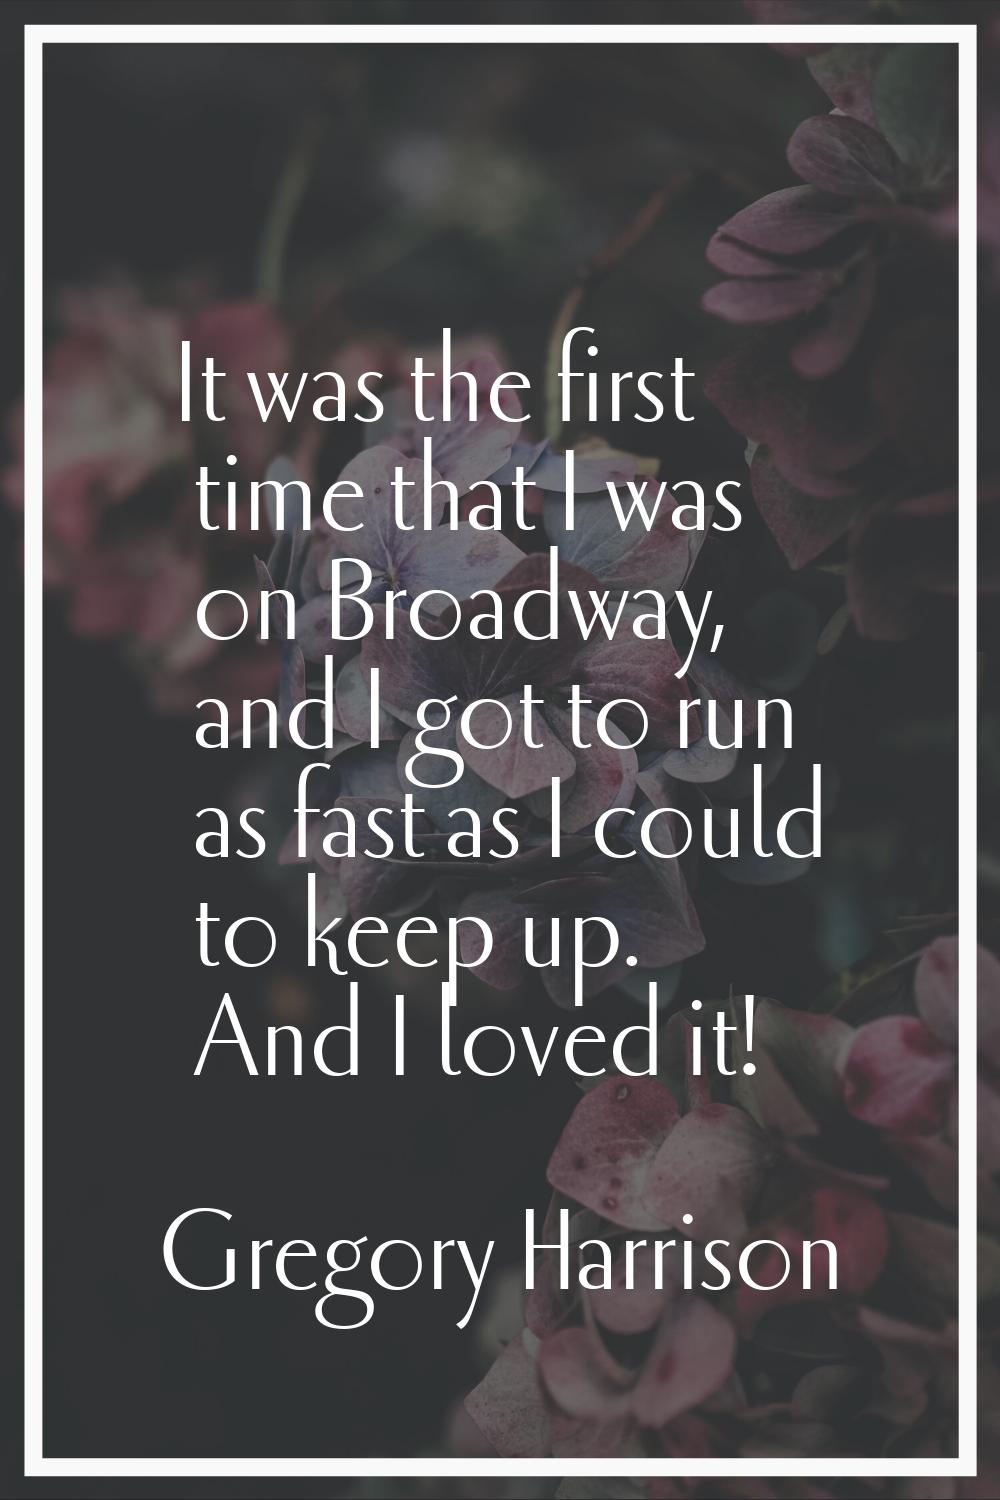 It was the first time that I was on Broadway, and I got to run as fast as I could to keep up. And I